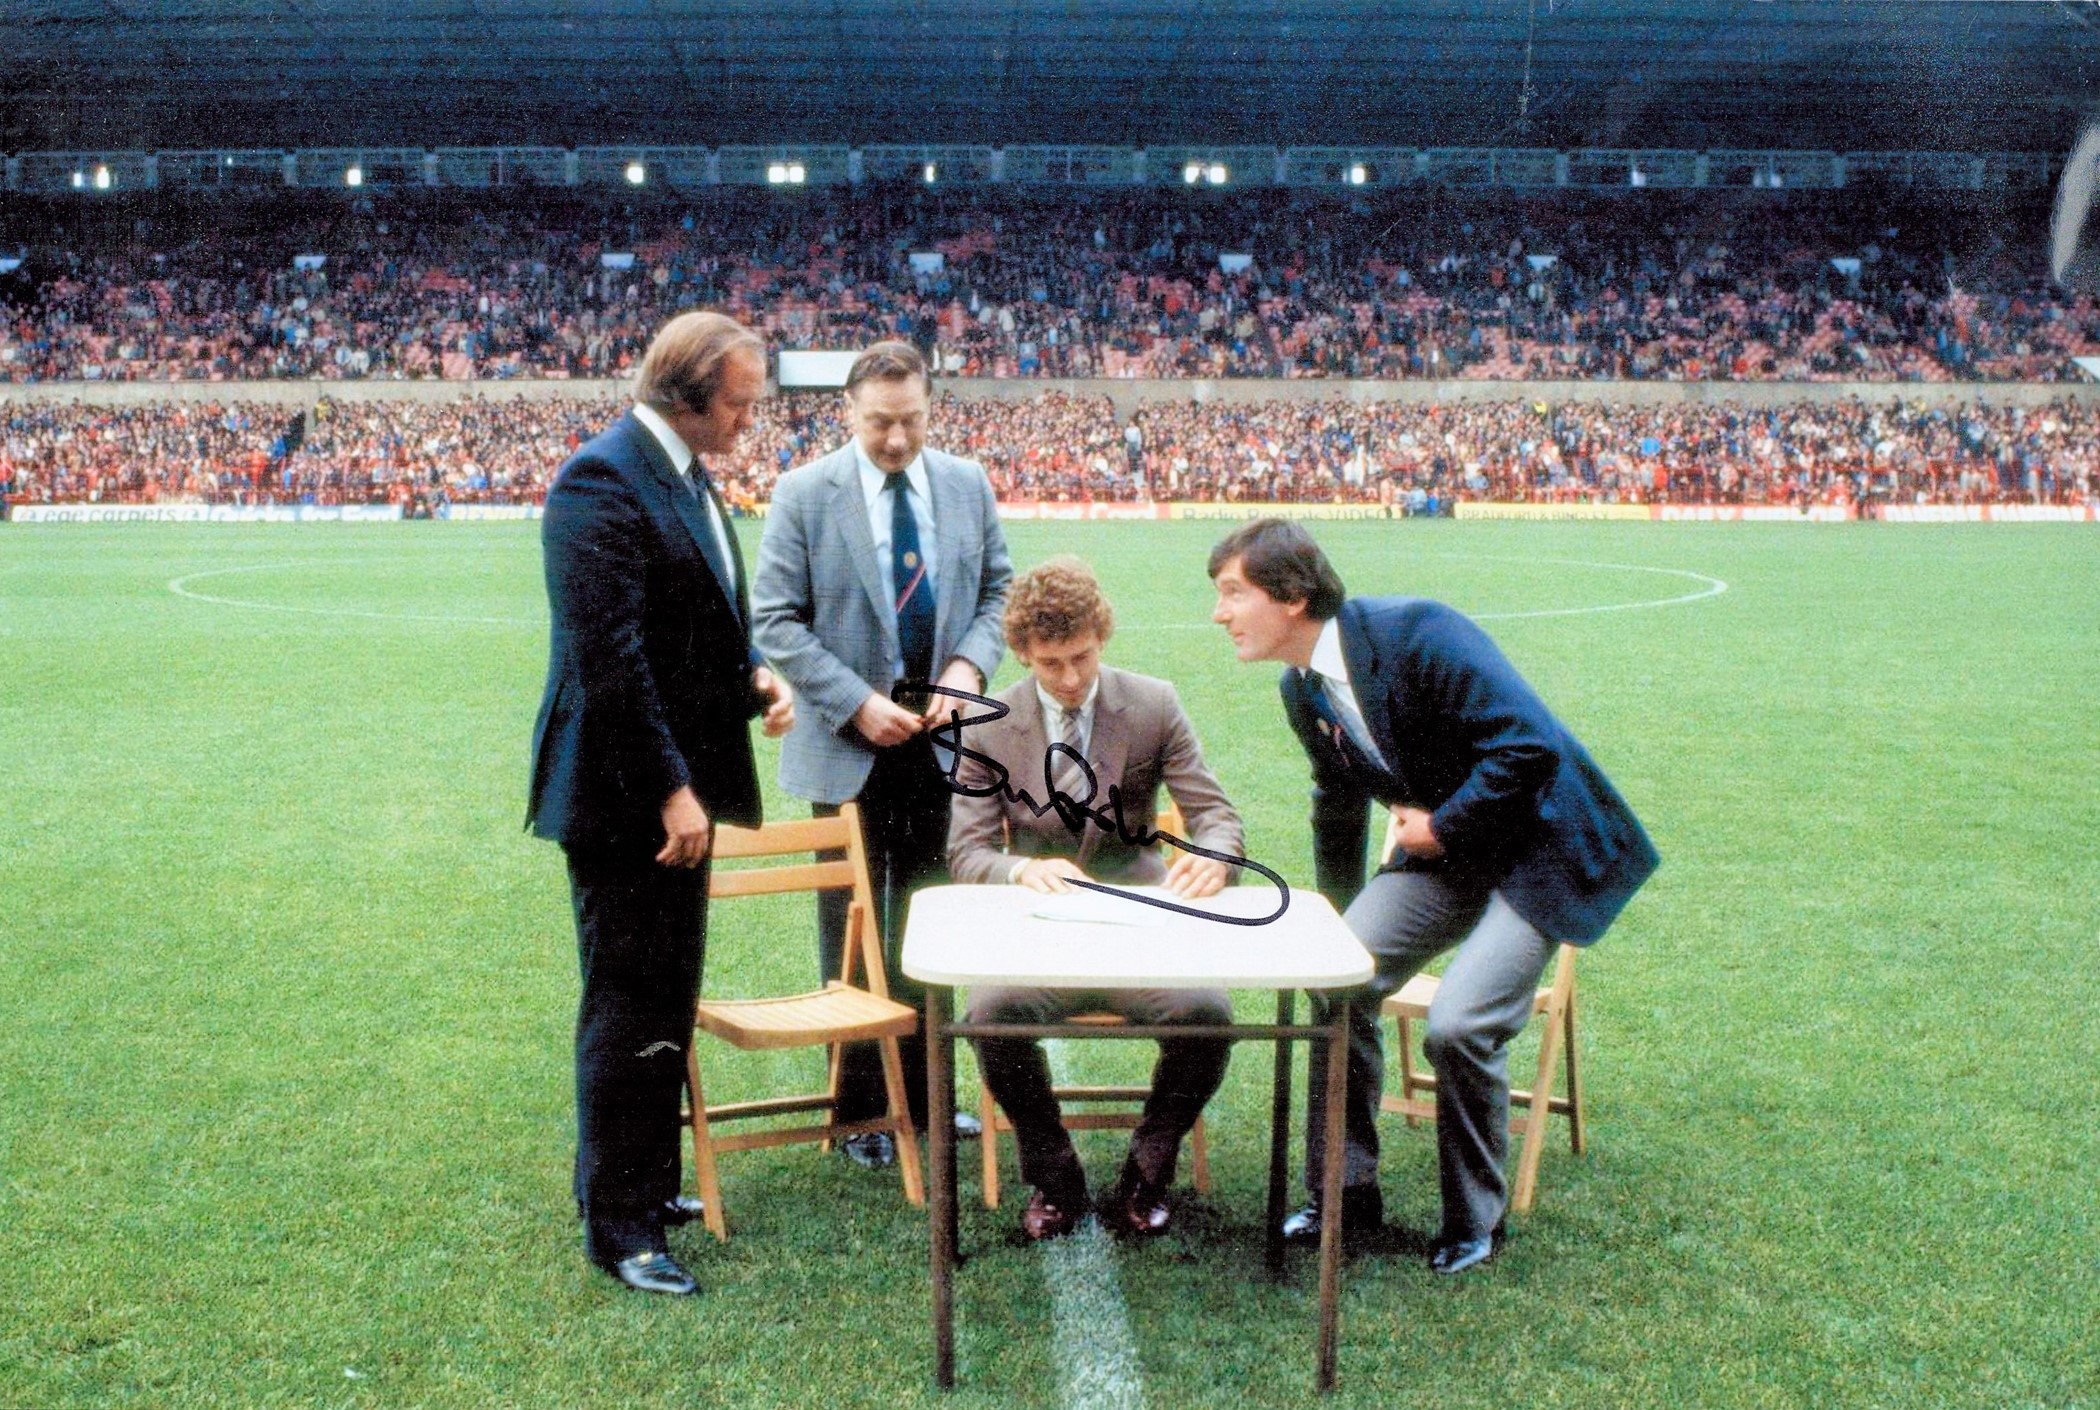 Football Bryan Robson signed 12x8 colour photo pictured signing for Manchester United. Bryan